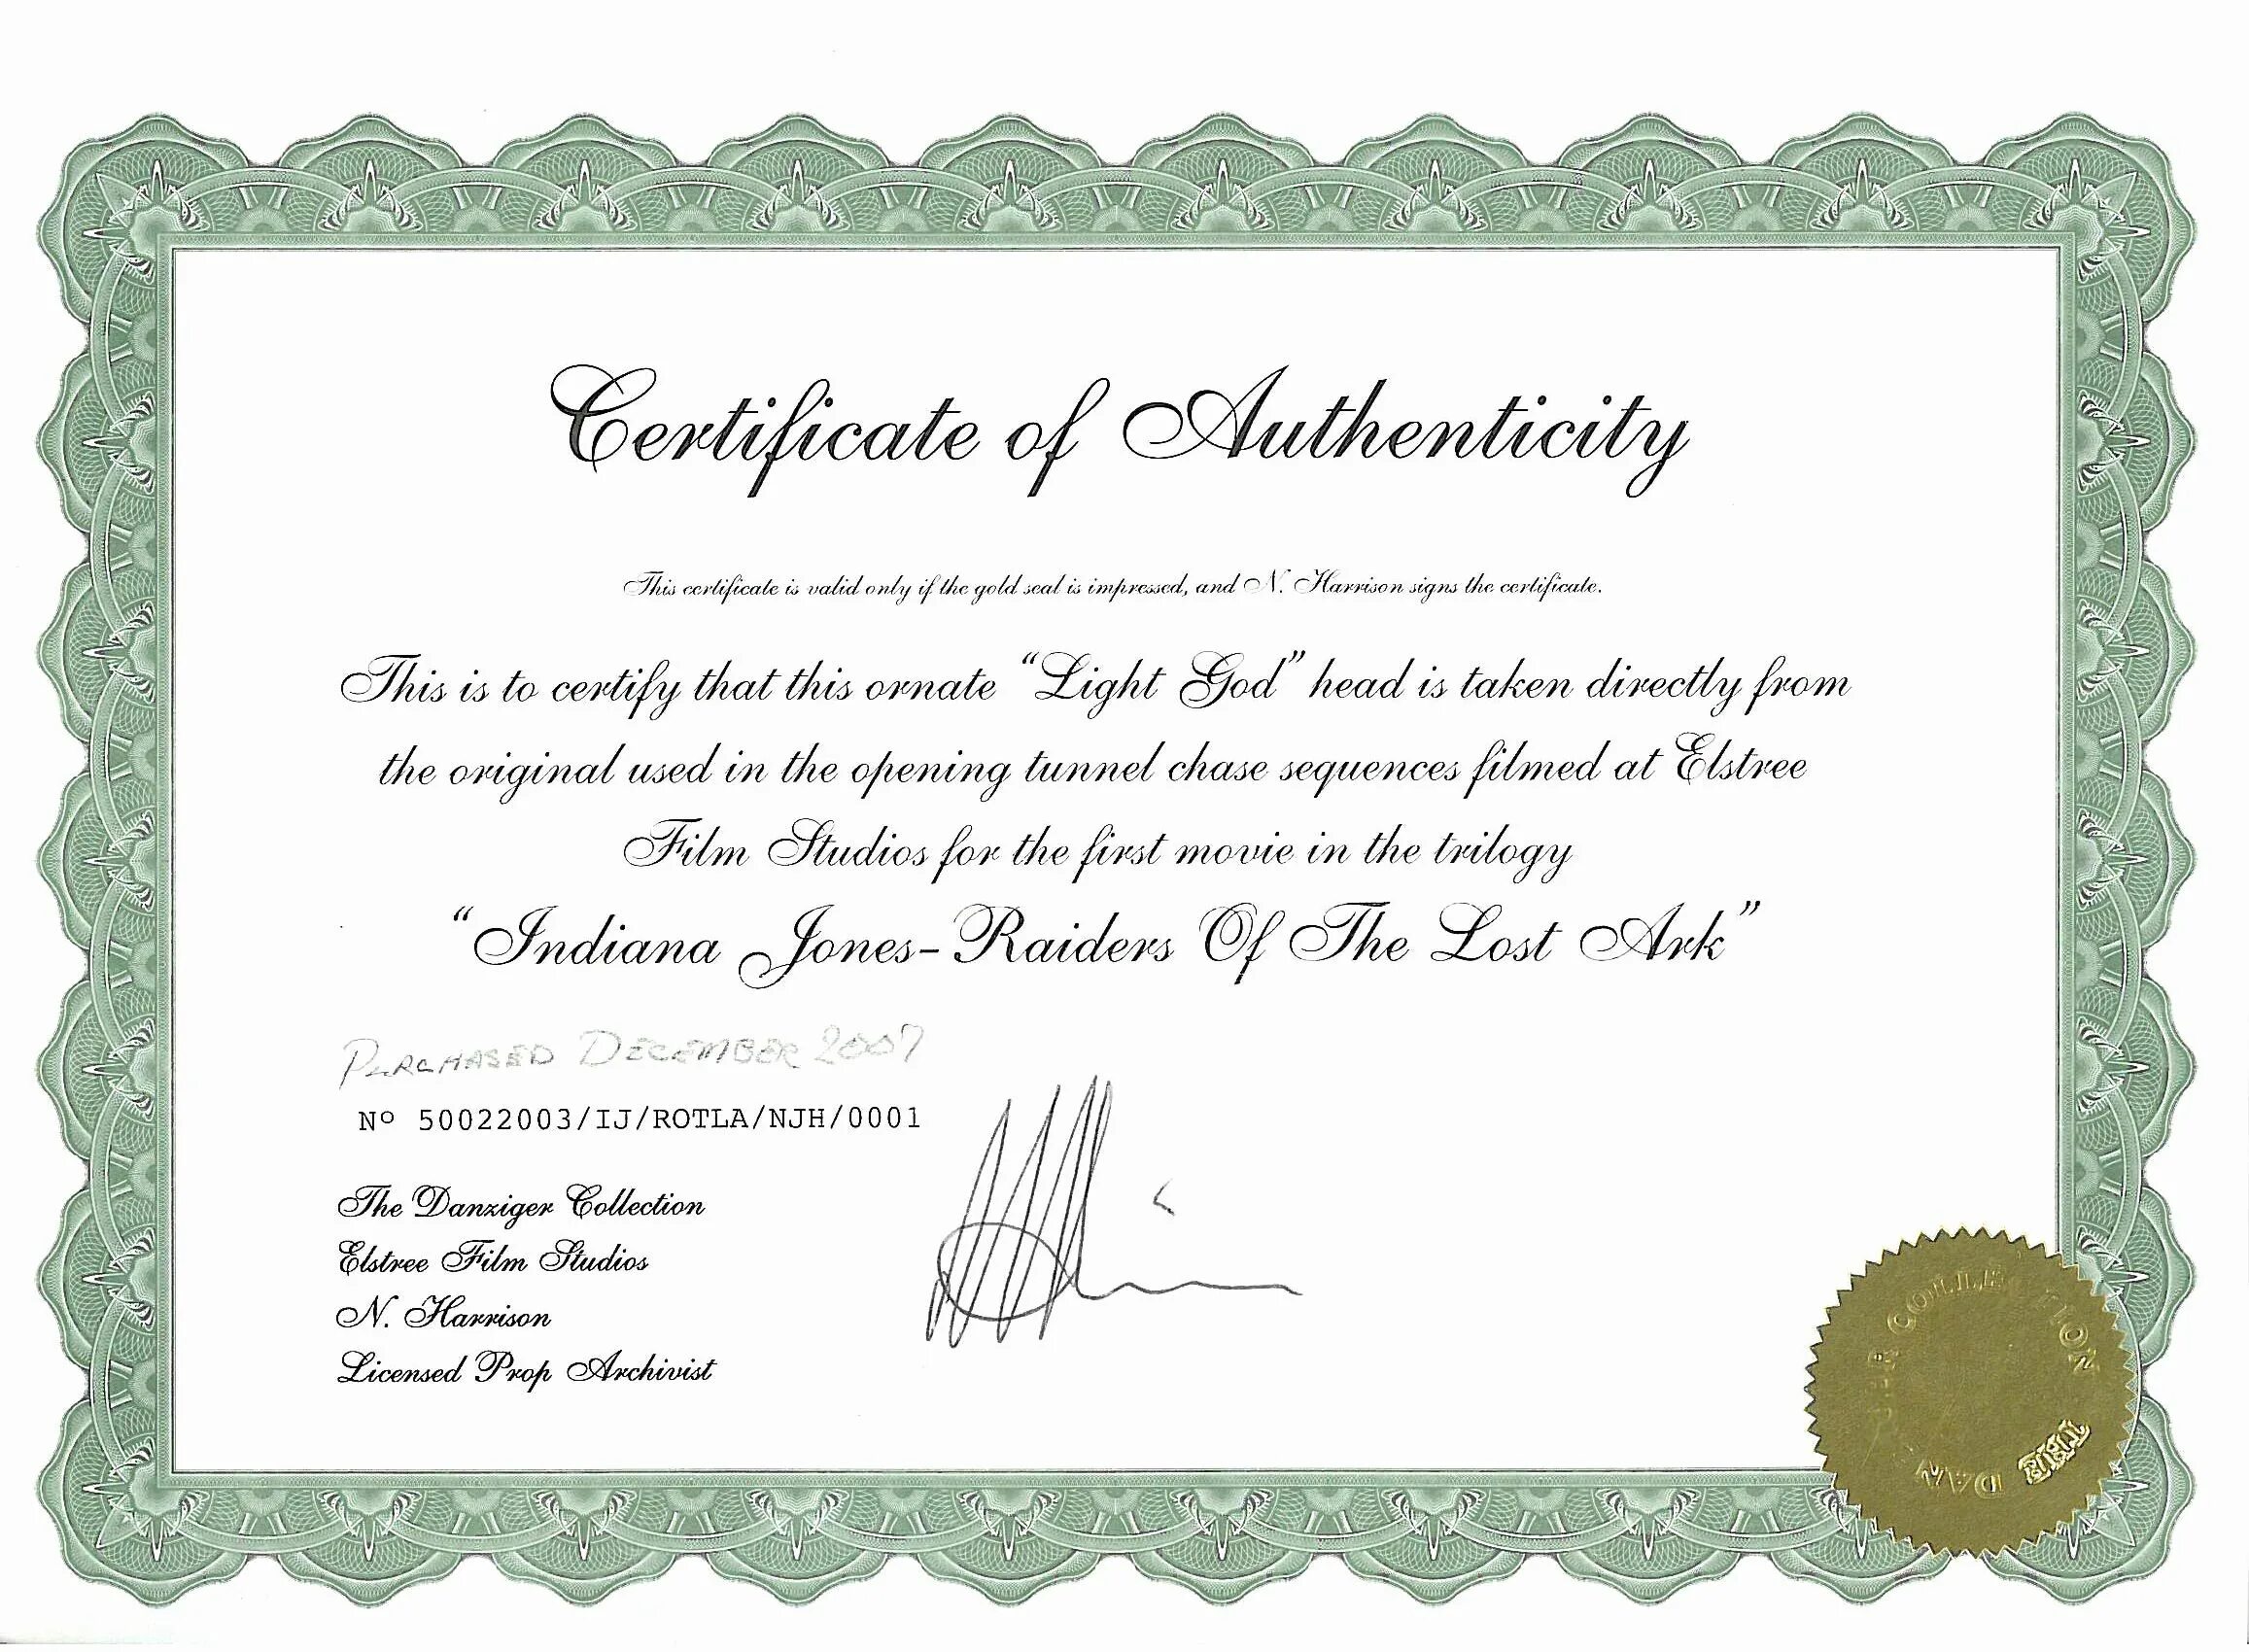 Certificate of authenticity. Certificate of authenticity Sample. COA - Certificate of authenticity.